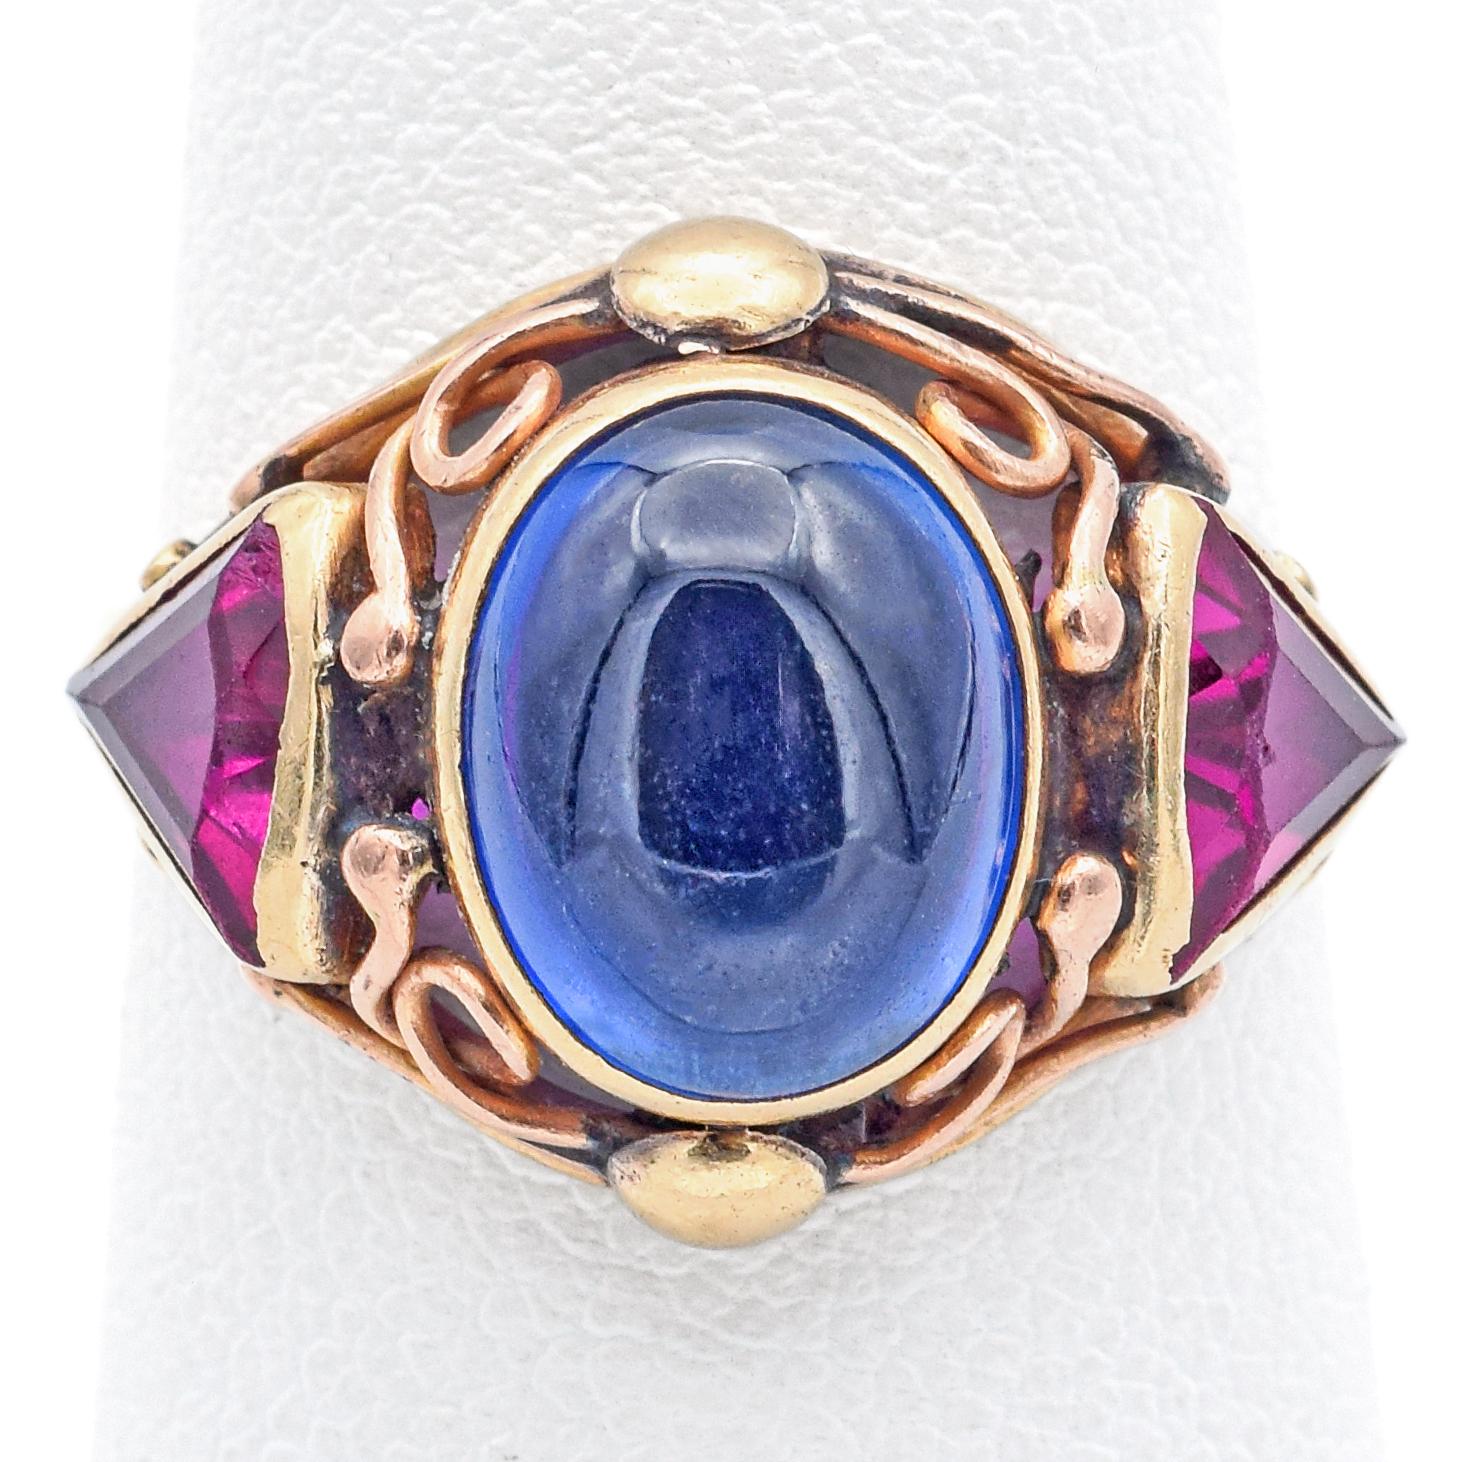 Weight: 4.1 Grams
Stone: 4.06 Ct (10x8x4.7 mm) Lab Sapphire & Ruby (7 x 6 mm)
Face of Ring: 19.0 x 14.5 x 7.0 mm
Size: 6
Hallmark: 14K

ITEM #: BR-1076-101723-19